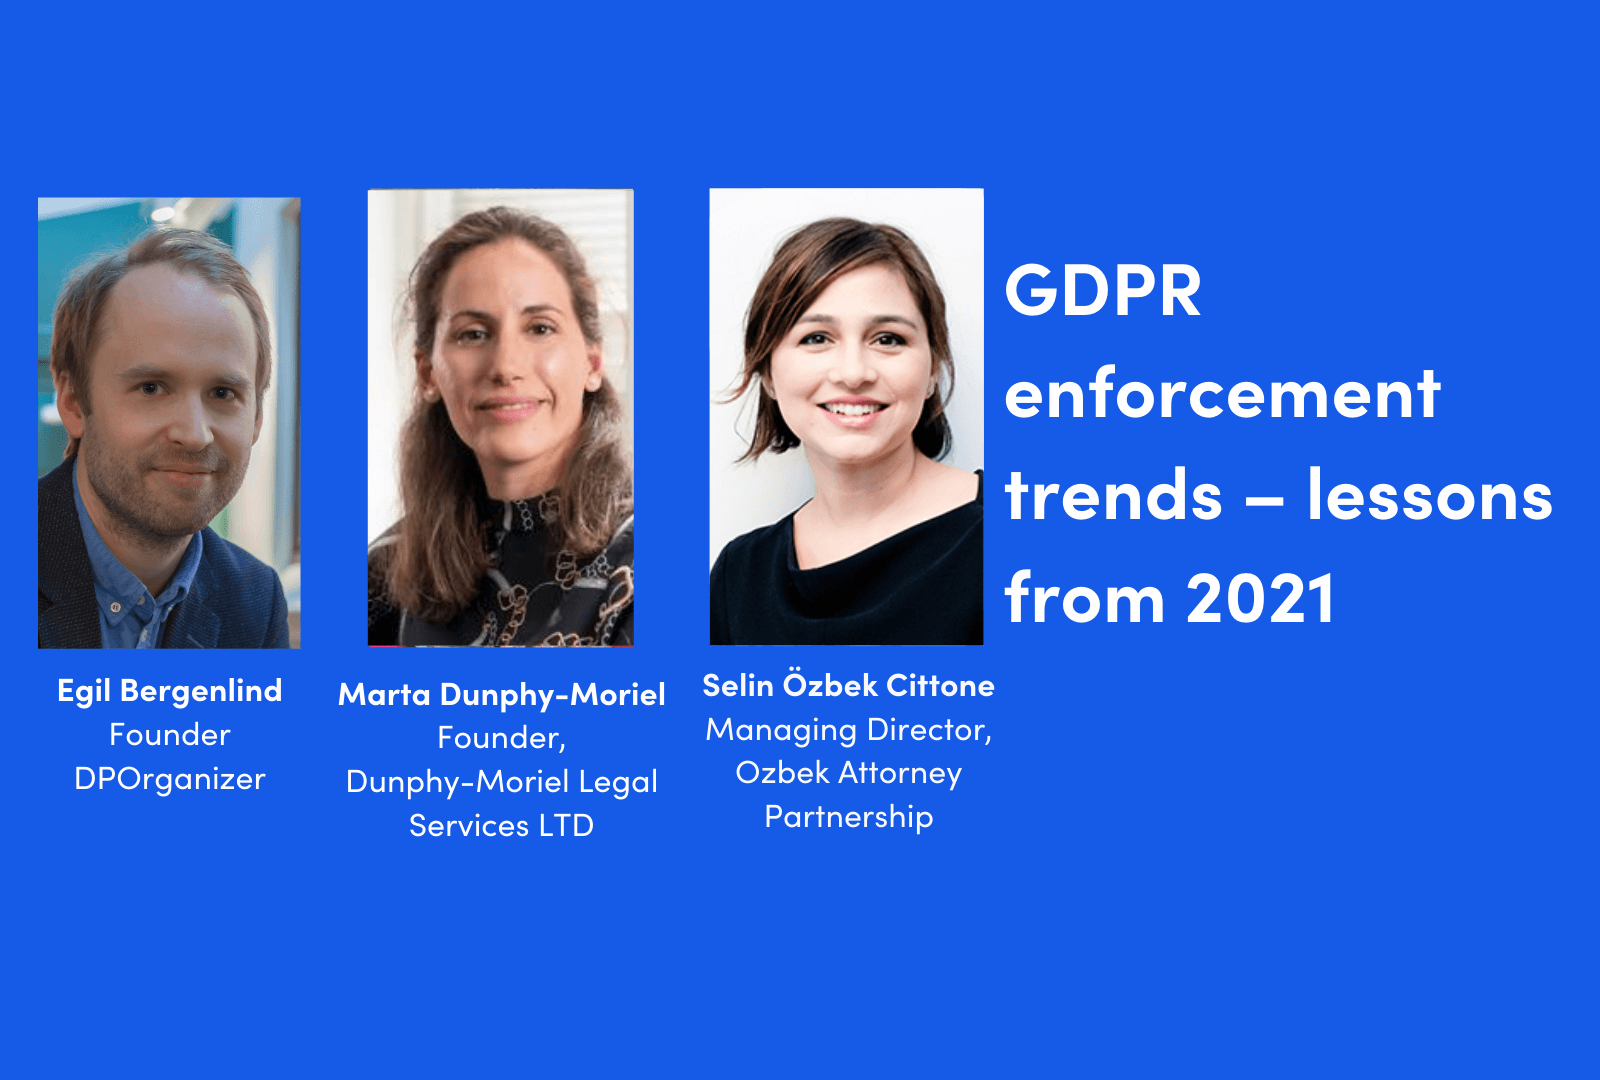 GDPR enforcement trends - lessons from 2021